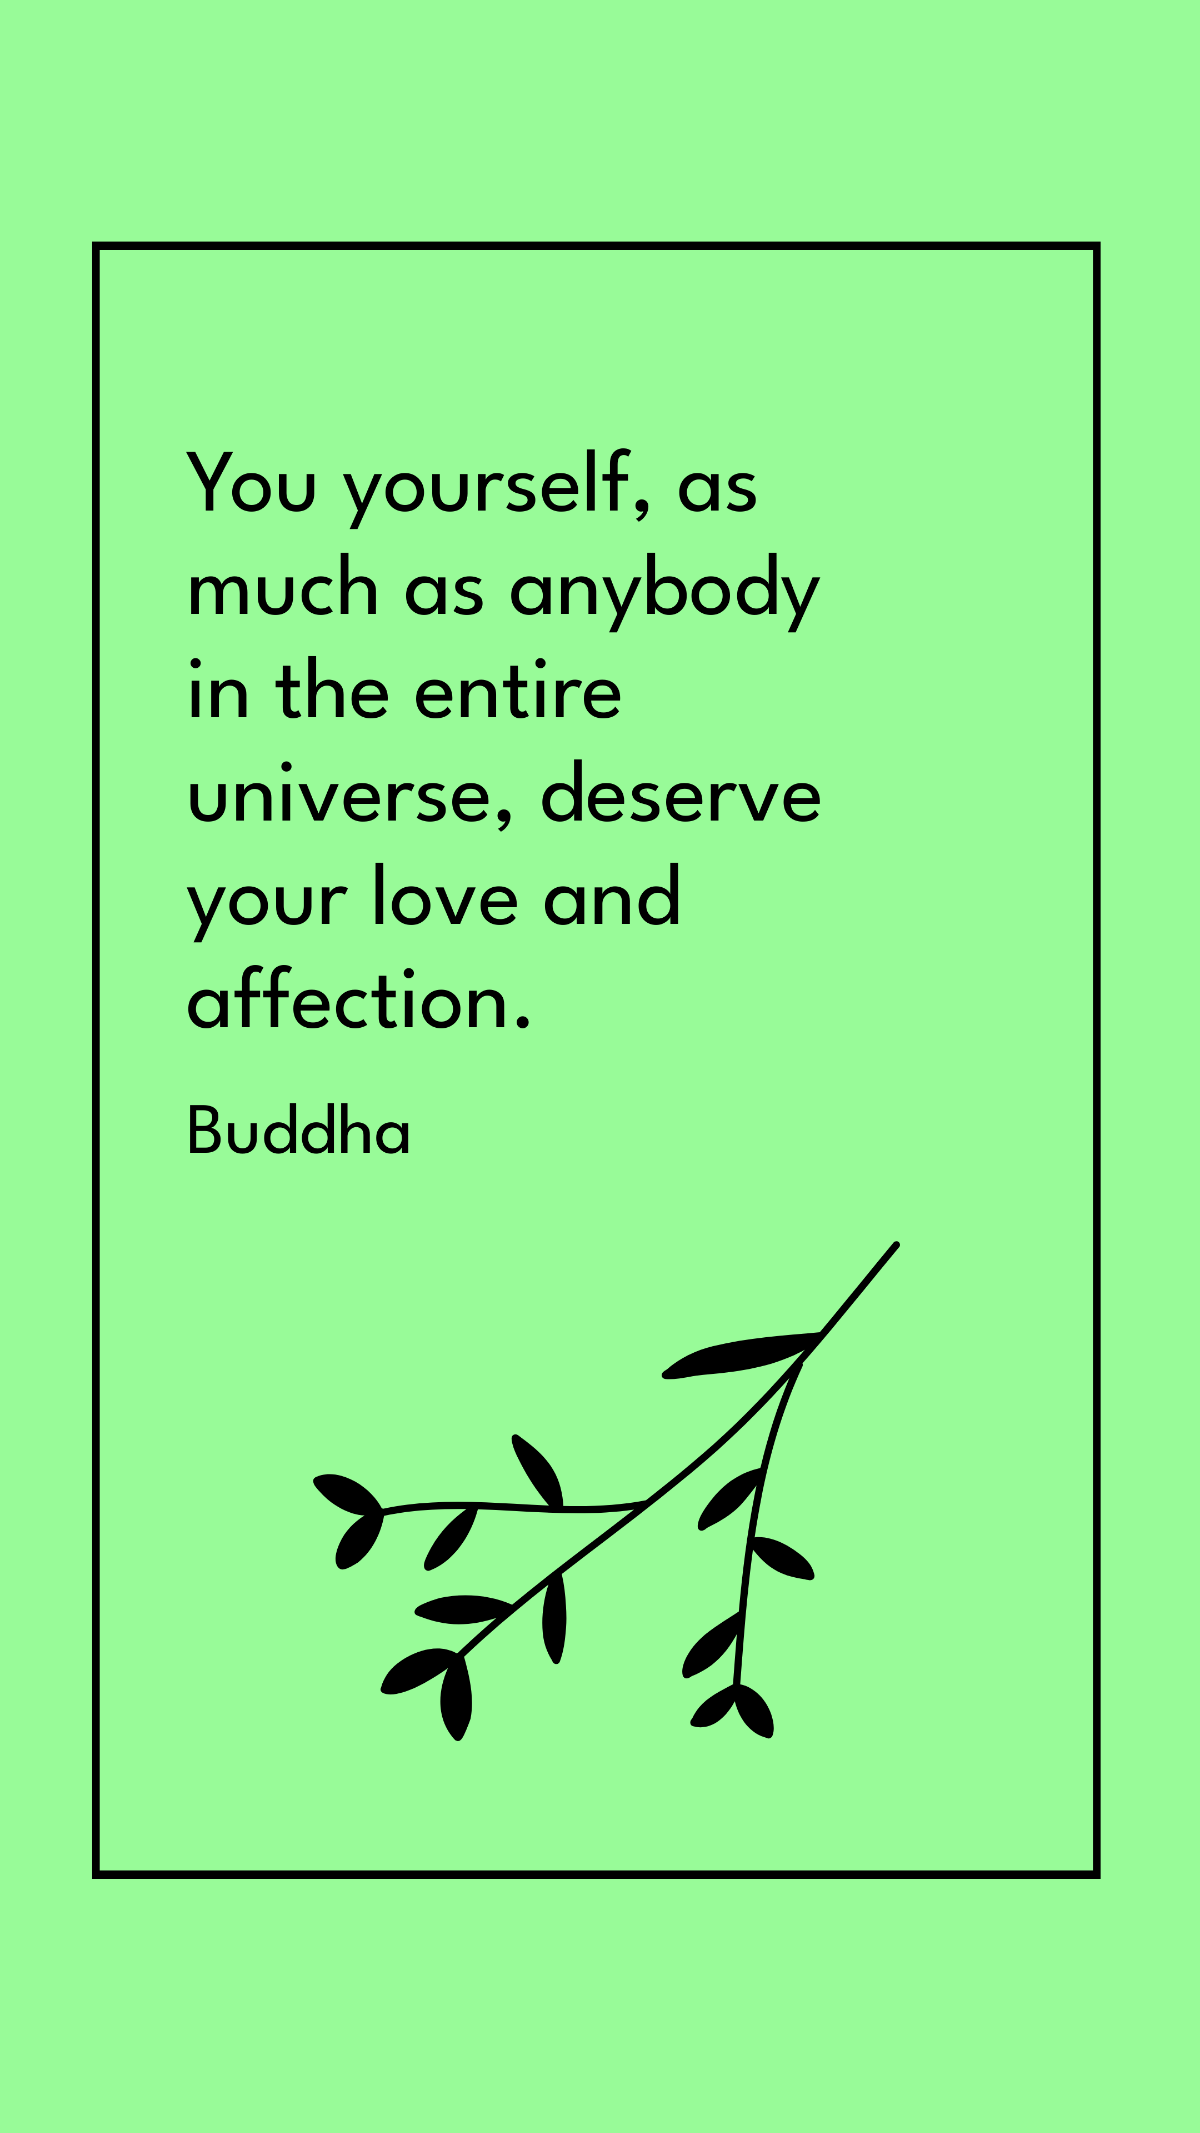 Buddha - You yourself, as much as anybody in the entire universe, deserve your love and affection. Template